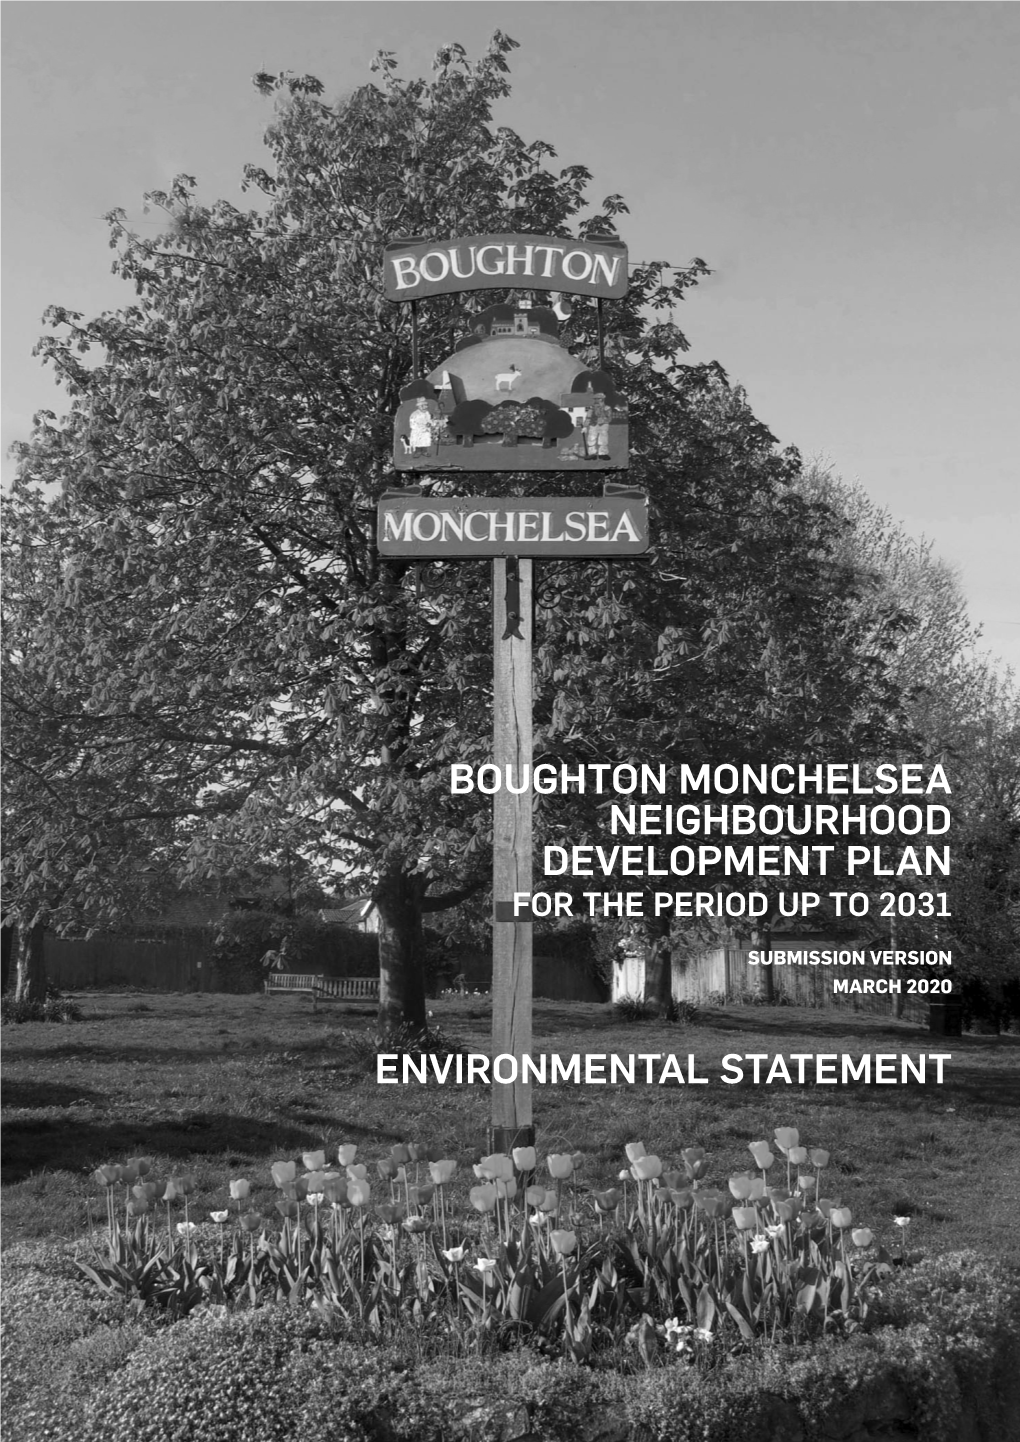 Boughton Monchelsea Neighbourhood Development Plan for the Period up to 2031